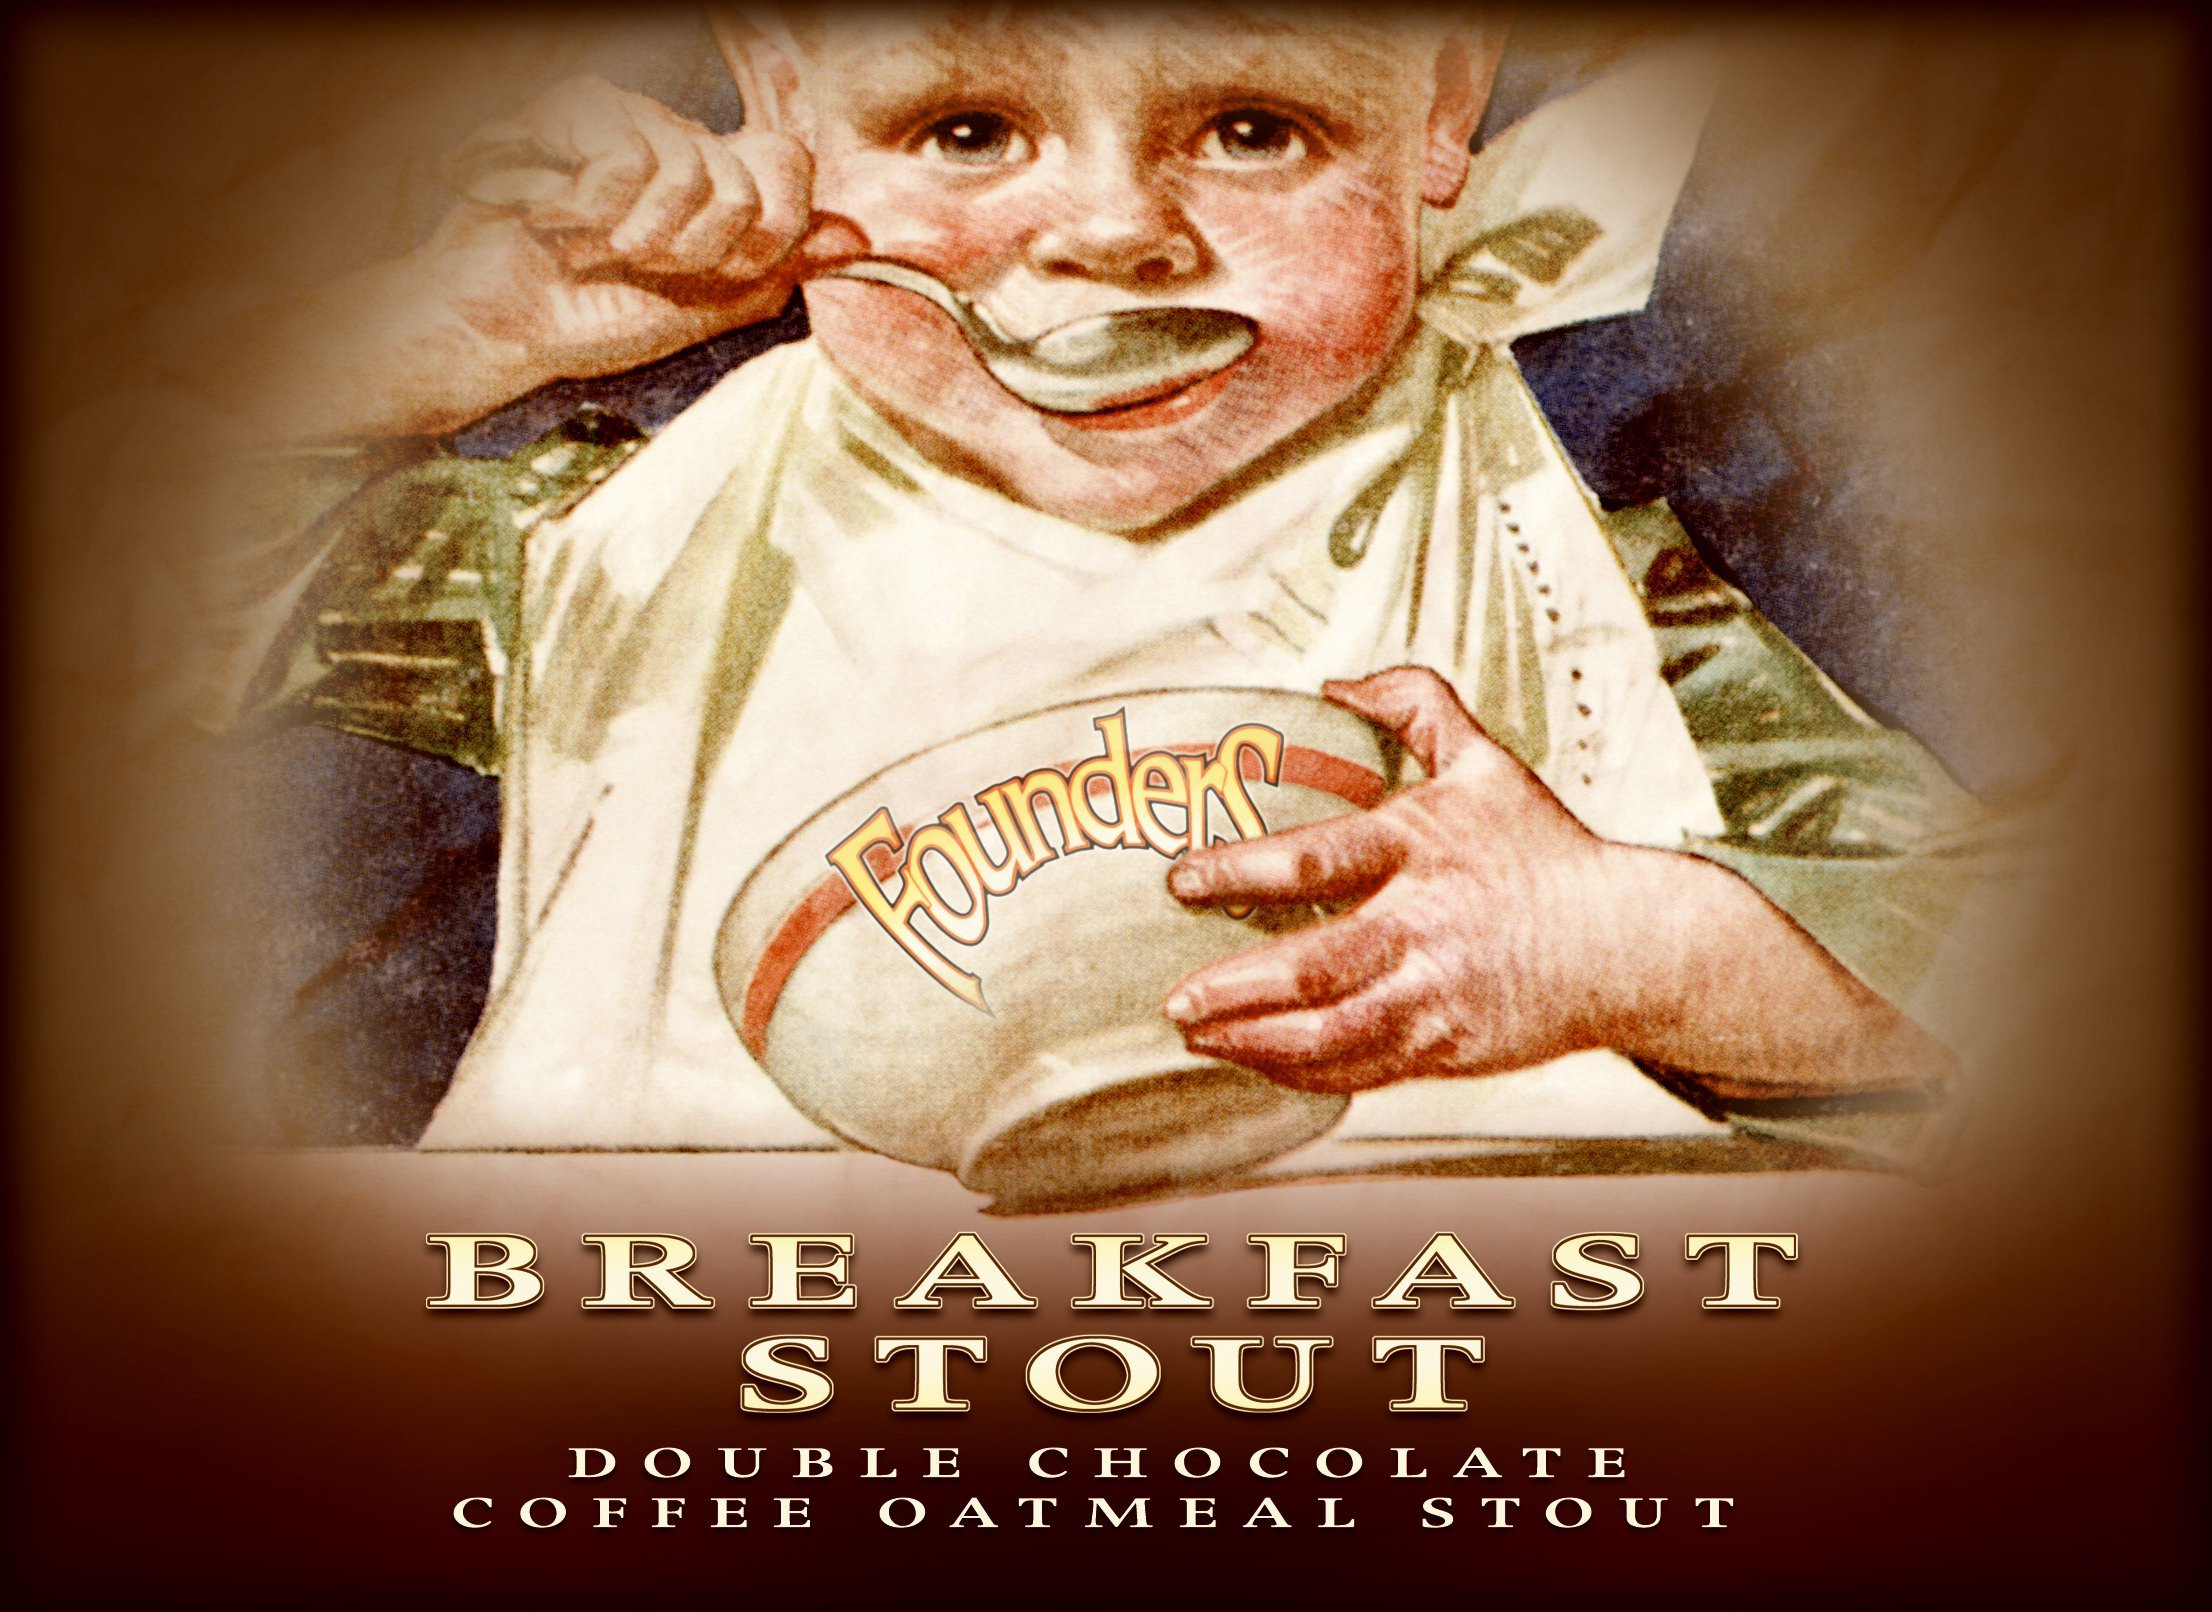  BREAKFAST STOUT DOUBLE CHOCOLATE COFFEEOATMEAL STOUT FOUNDERS